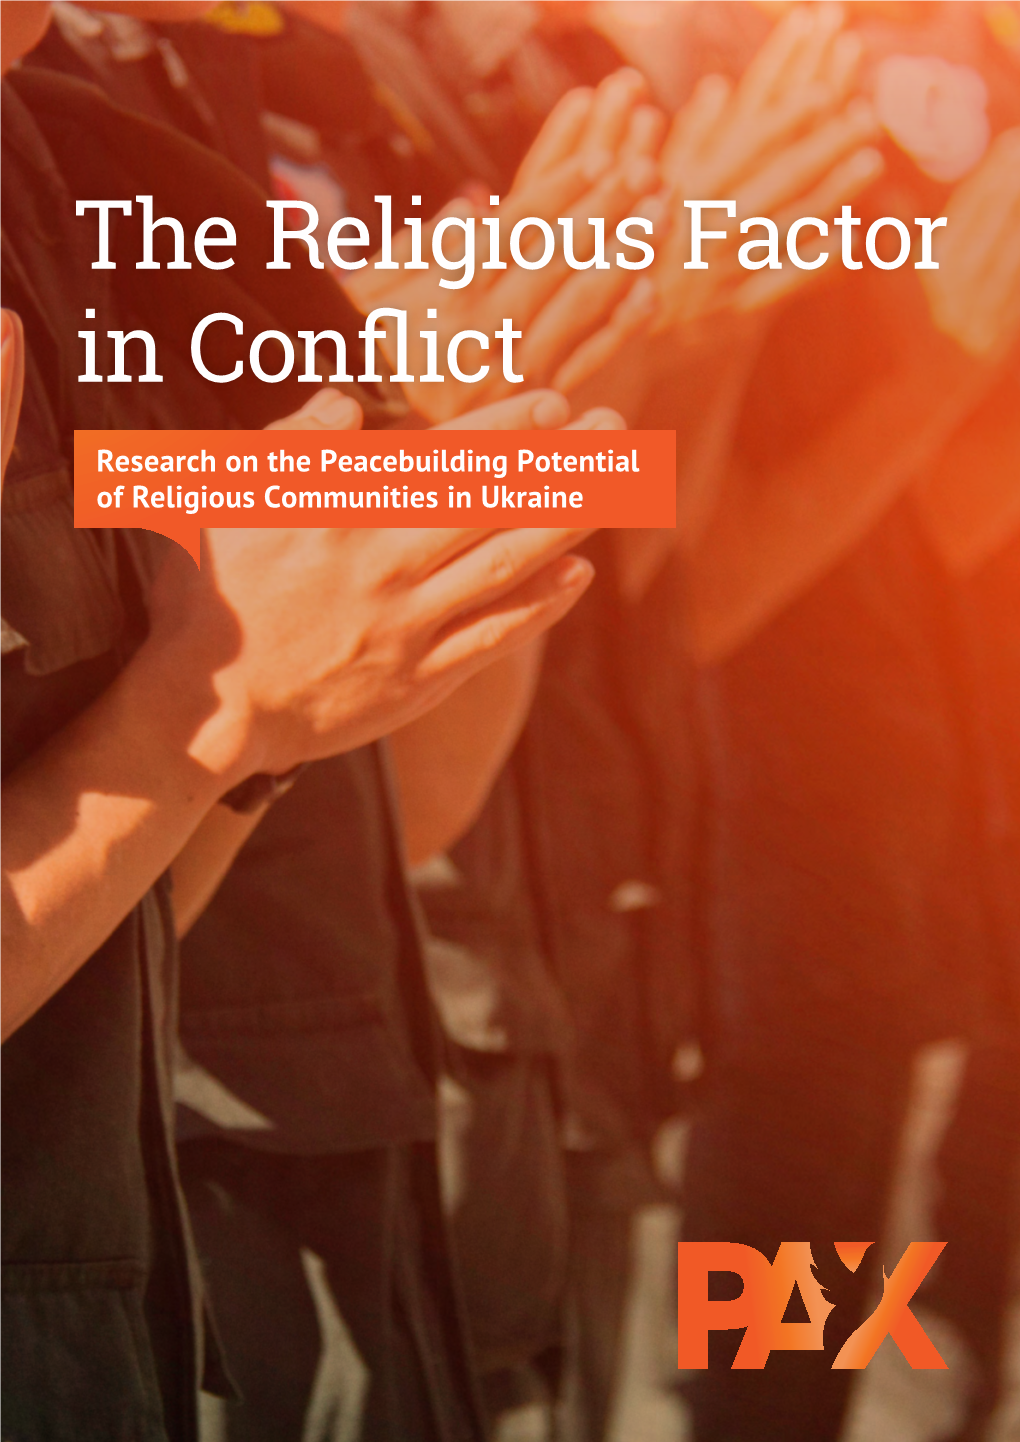 The Religious Factor in Conflict